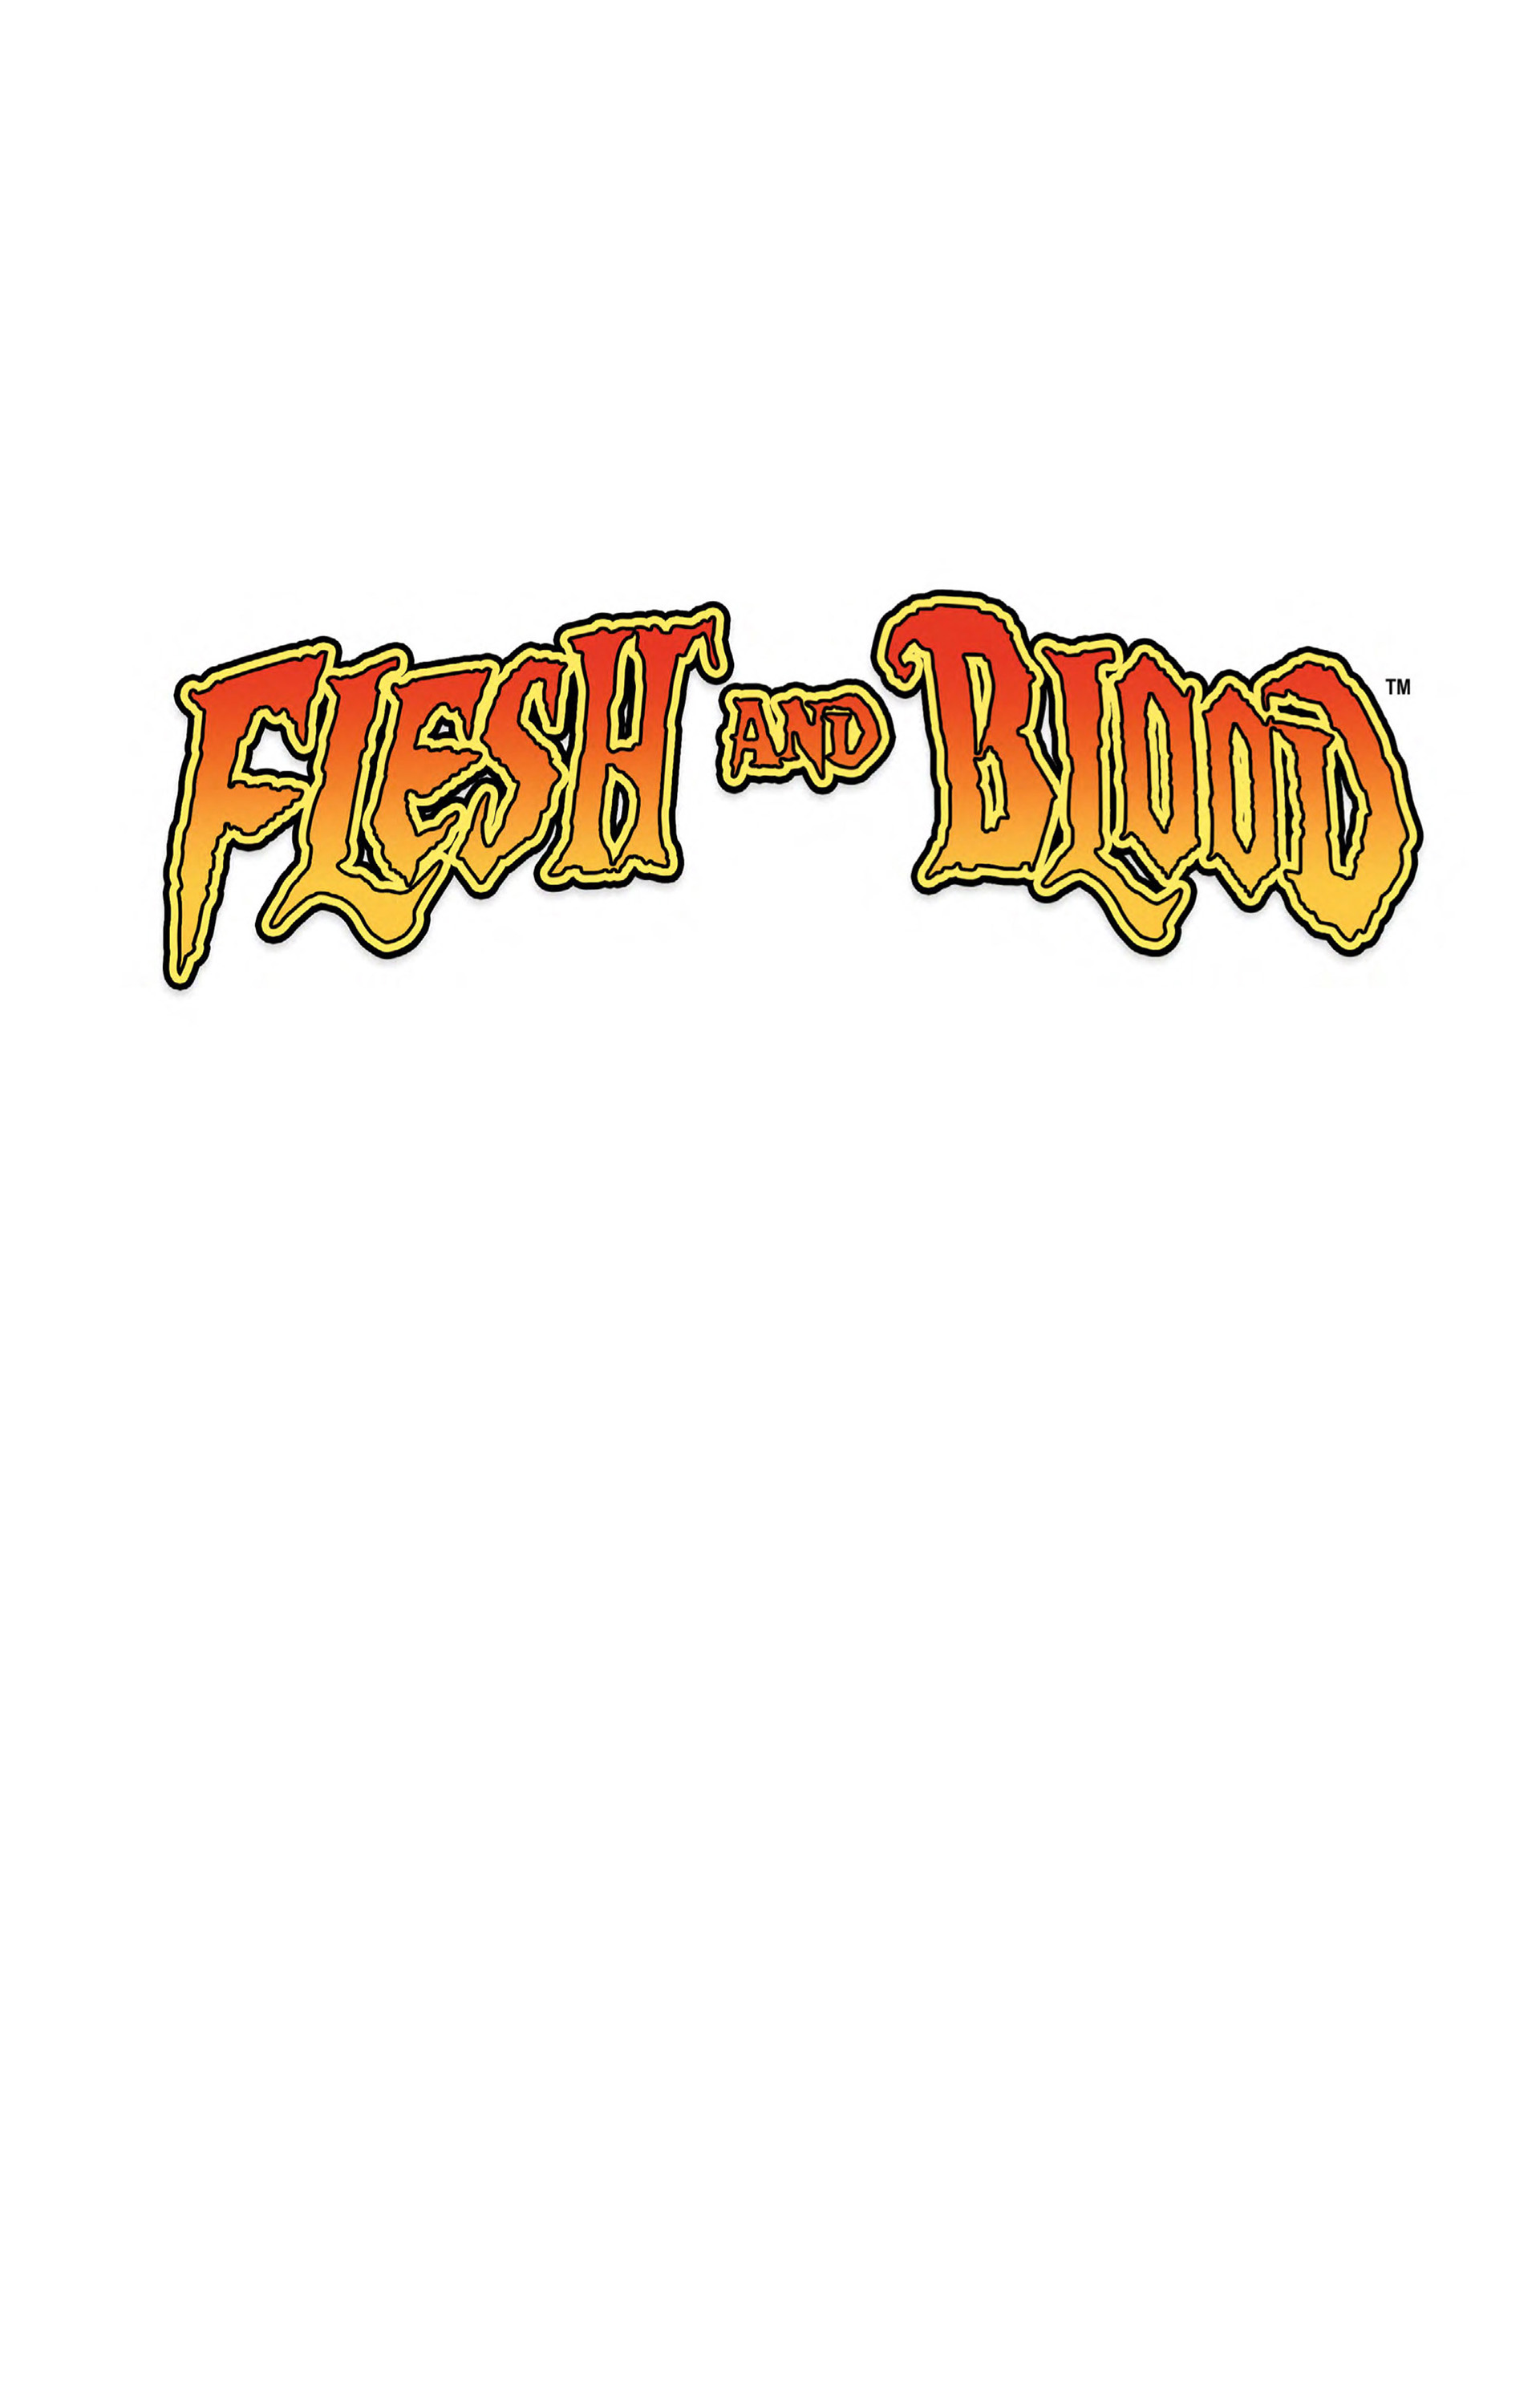 Read online Flesh and Blood comic -  Issue # TPB 1 - 3